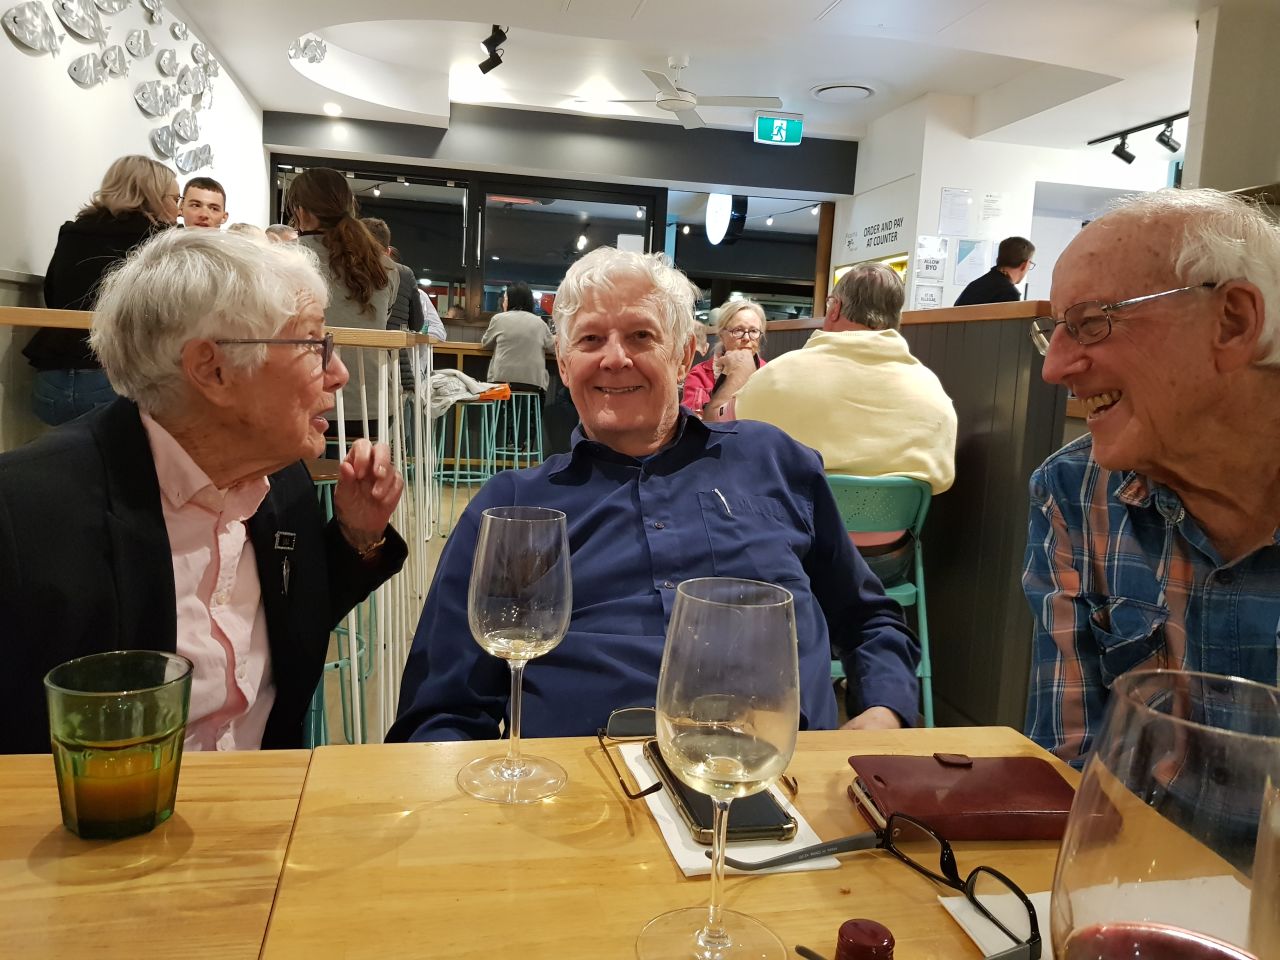 Three is never a crowd when you are having a glass of wine and a good conversation. At our August 2022 dinner at Pirahna Fish Caf, New Farm. Great ambiance and delicious food.
Photo: Courtesy Francesca.